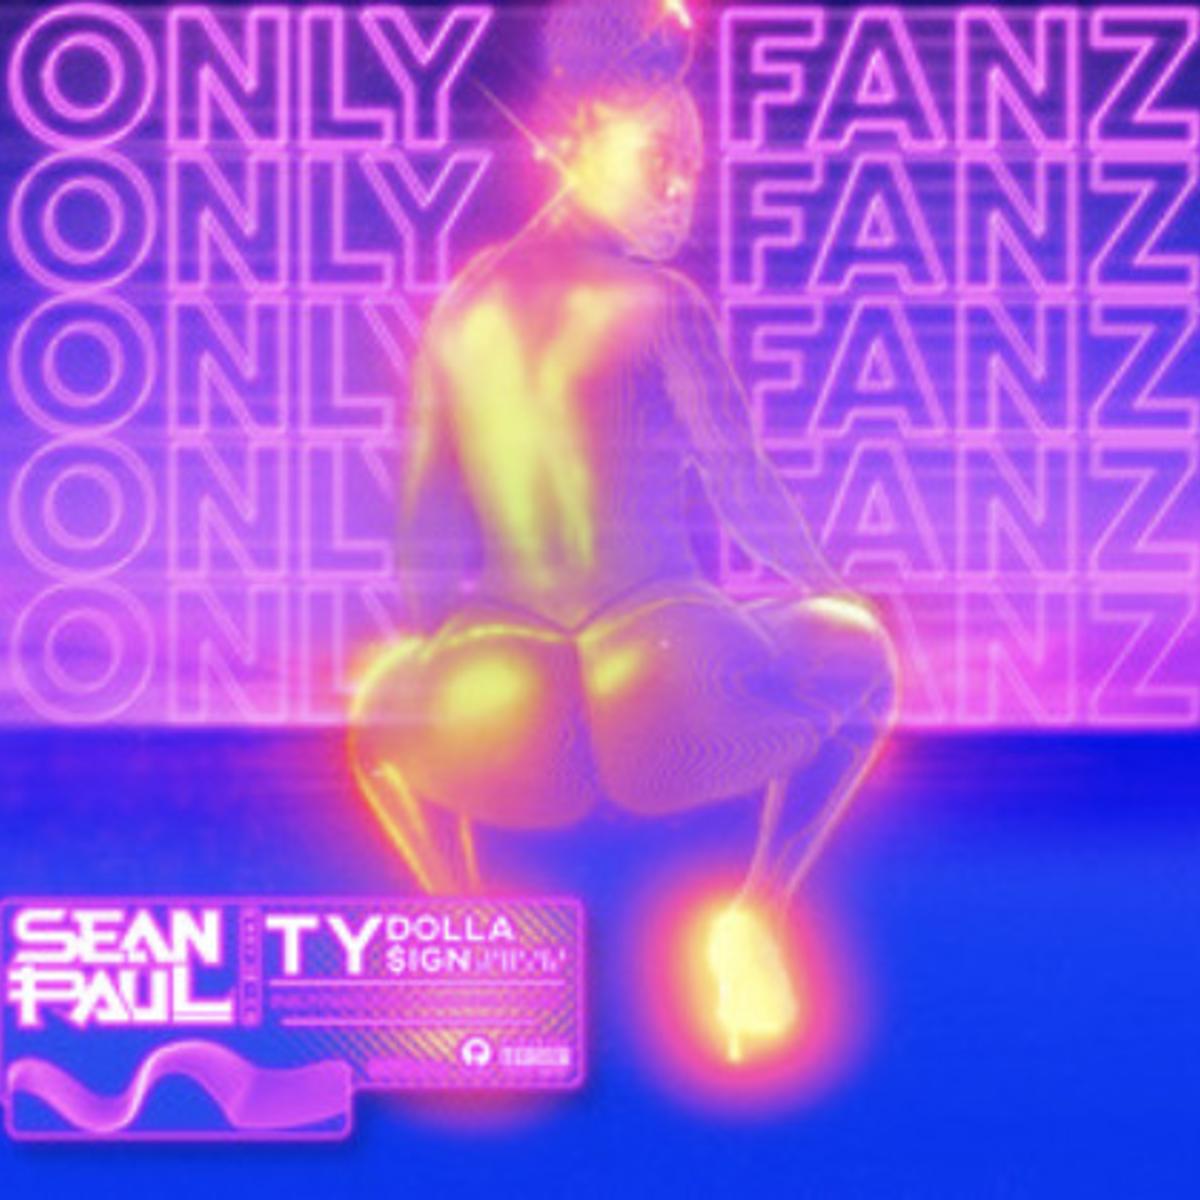 Sean Paul Only Fanz ft. Ty Dolla ign